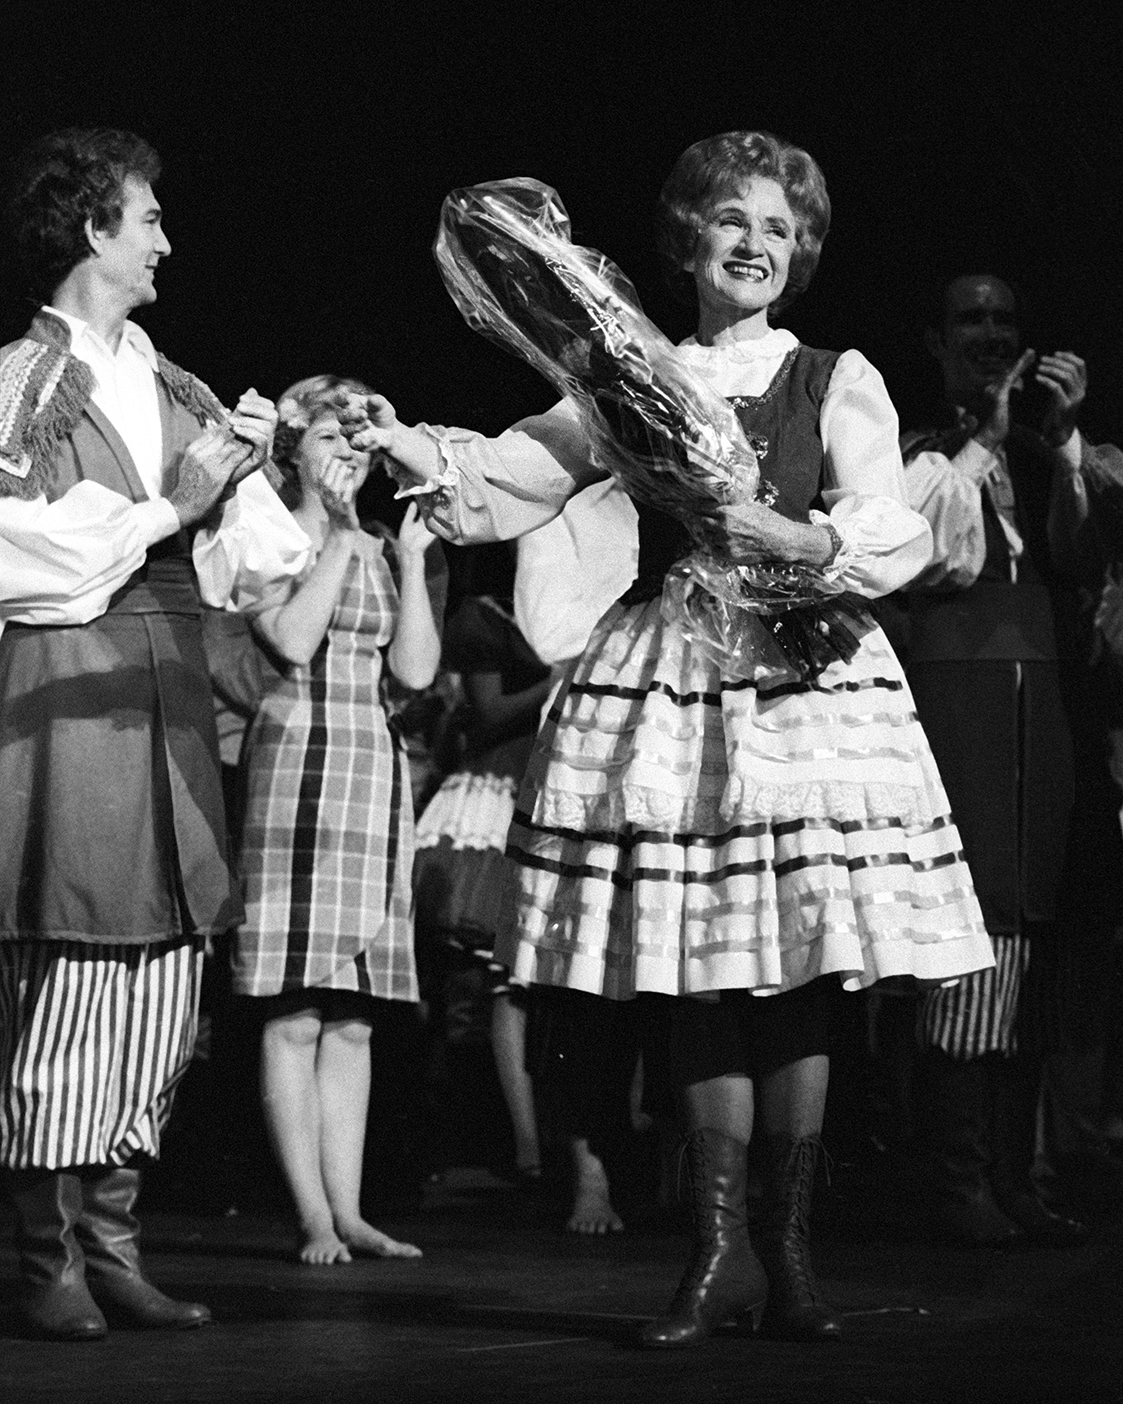 Mary Bee Jensen stands on stage holding a bouquet of flowers while performers stand around and clap.